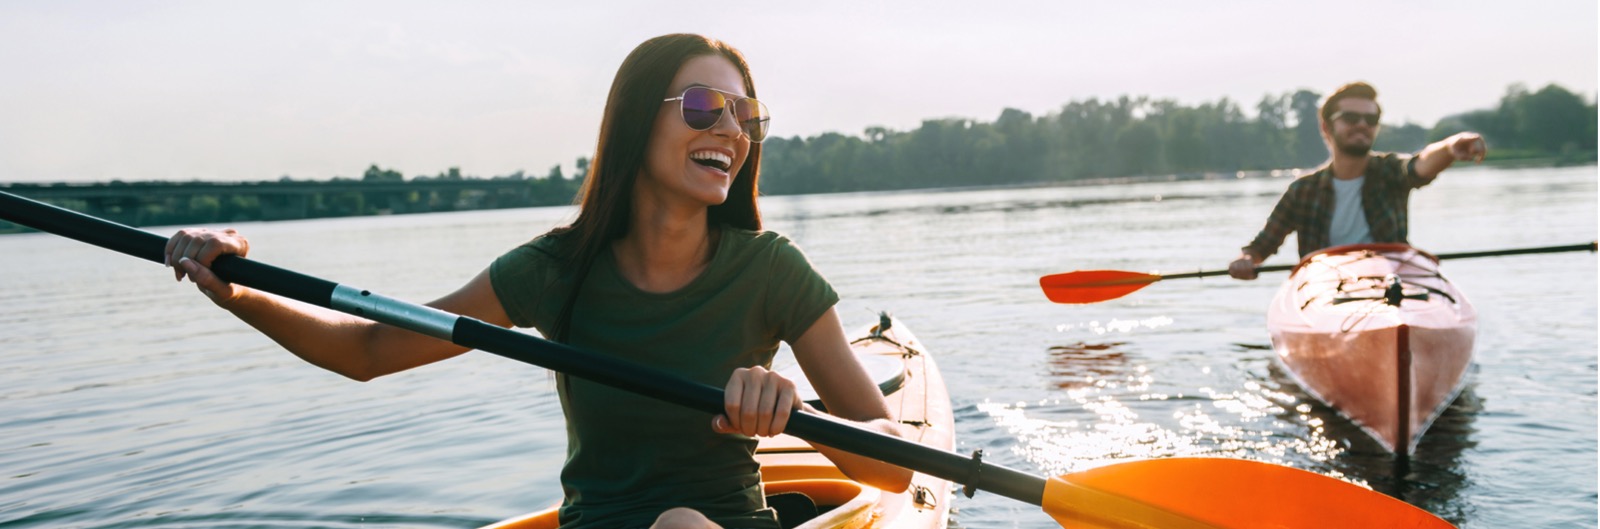 couple-kayaking-together-picture-1600x529.jpg